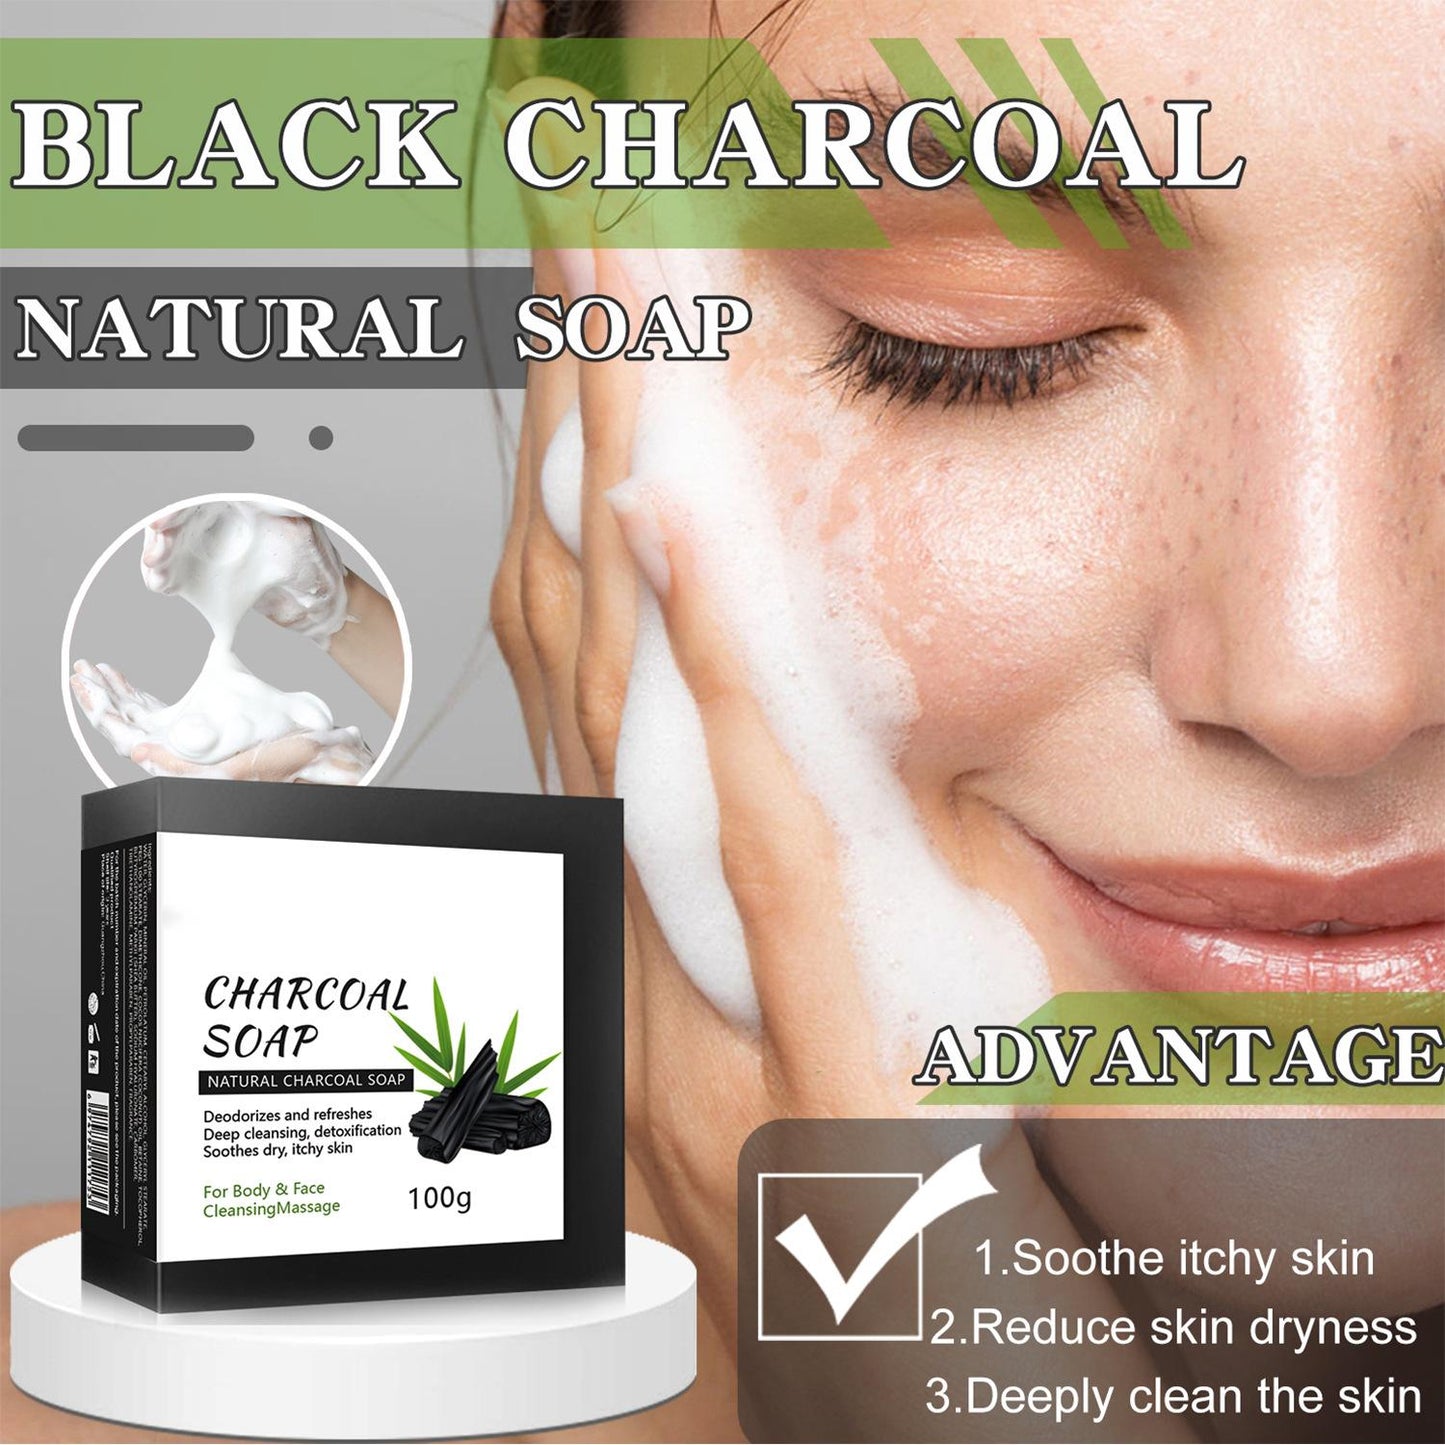 Personal Customized Black Charcoal Handmade Soap, Whitening Body Joints, Blackheads Removal 421